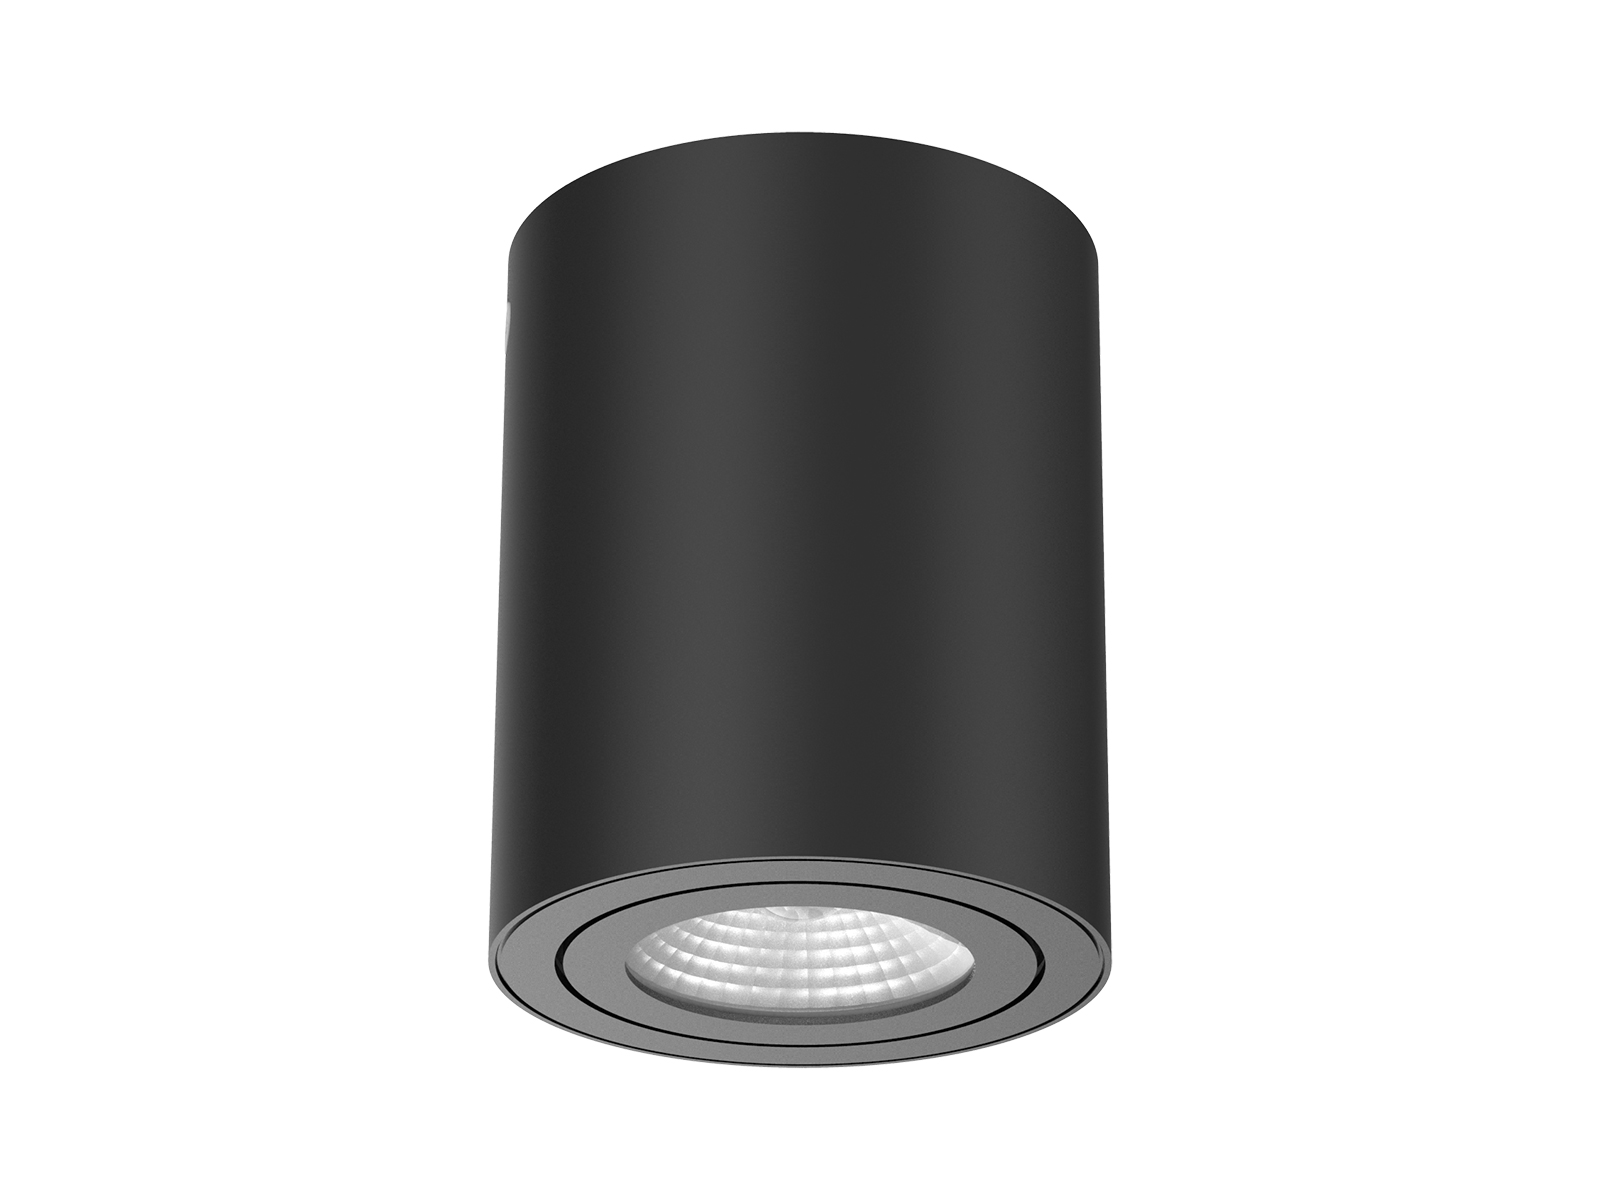 DL130 1 Round Surface Mounted Cylinder Downlight